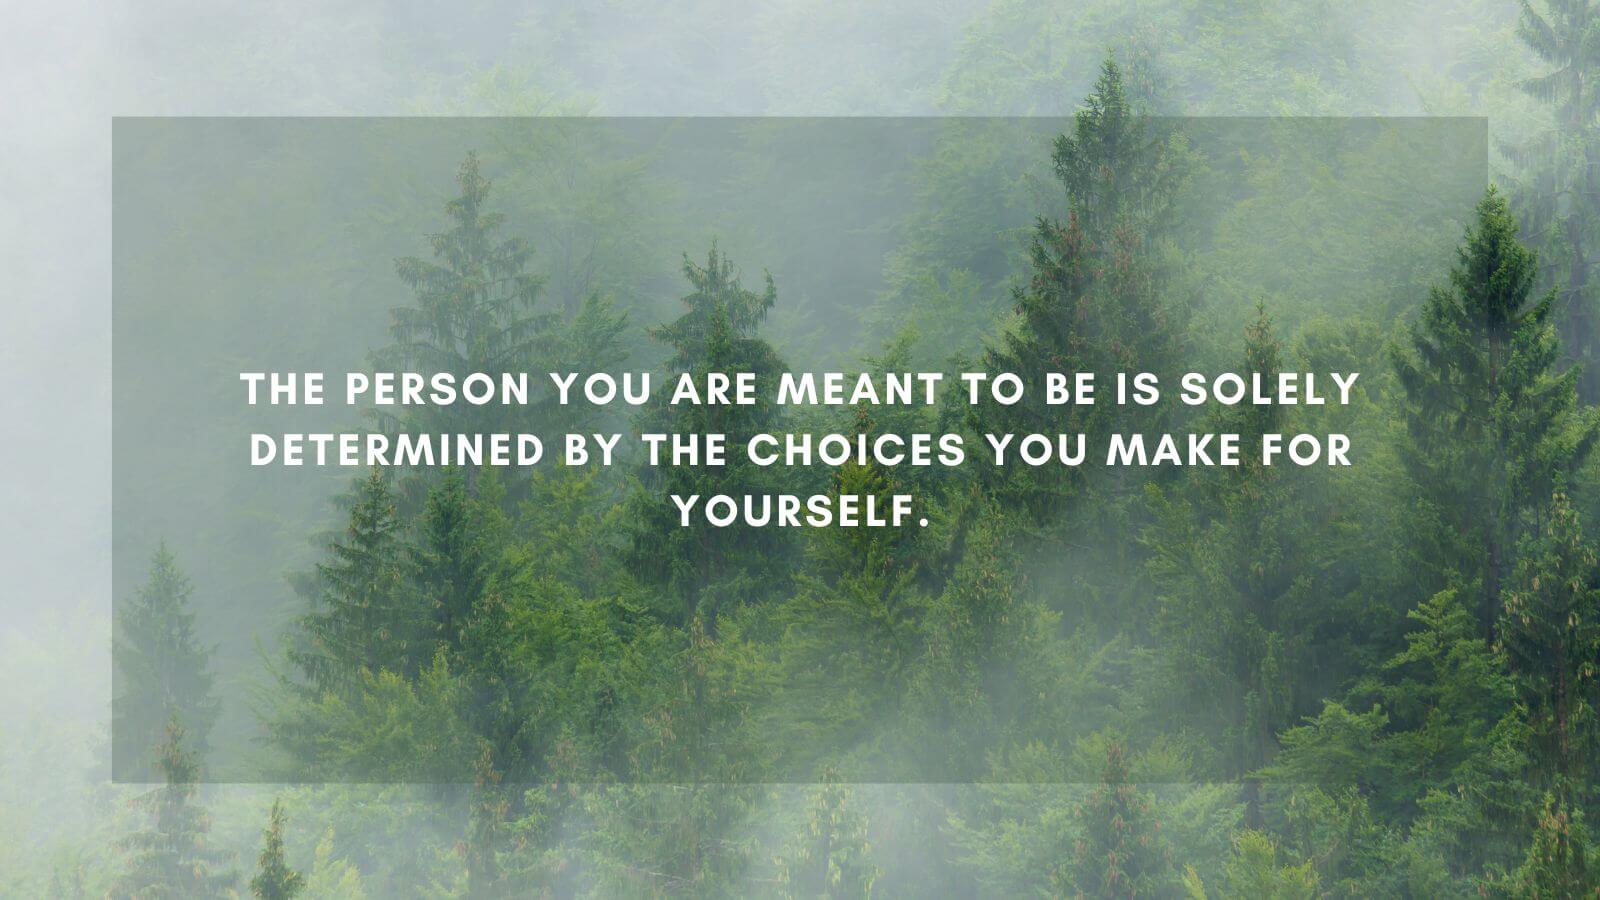 The person you are meant to be is solely determined by the choices you make for yourself.